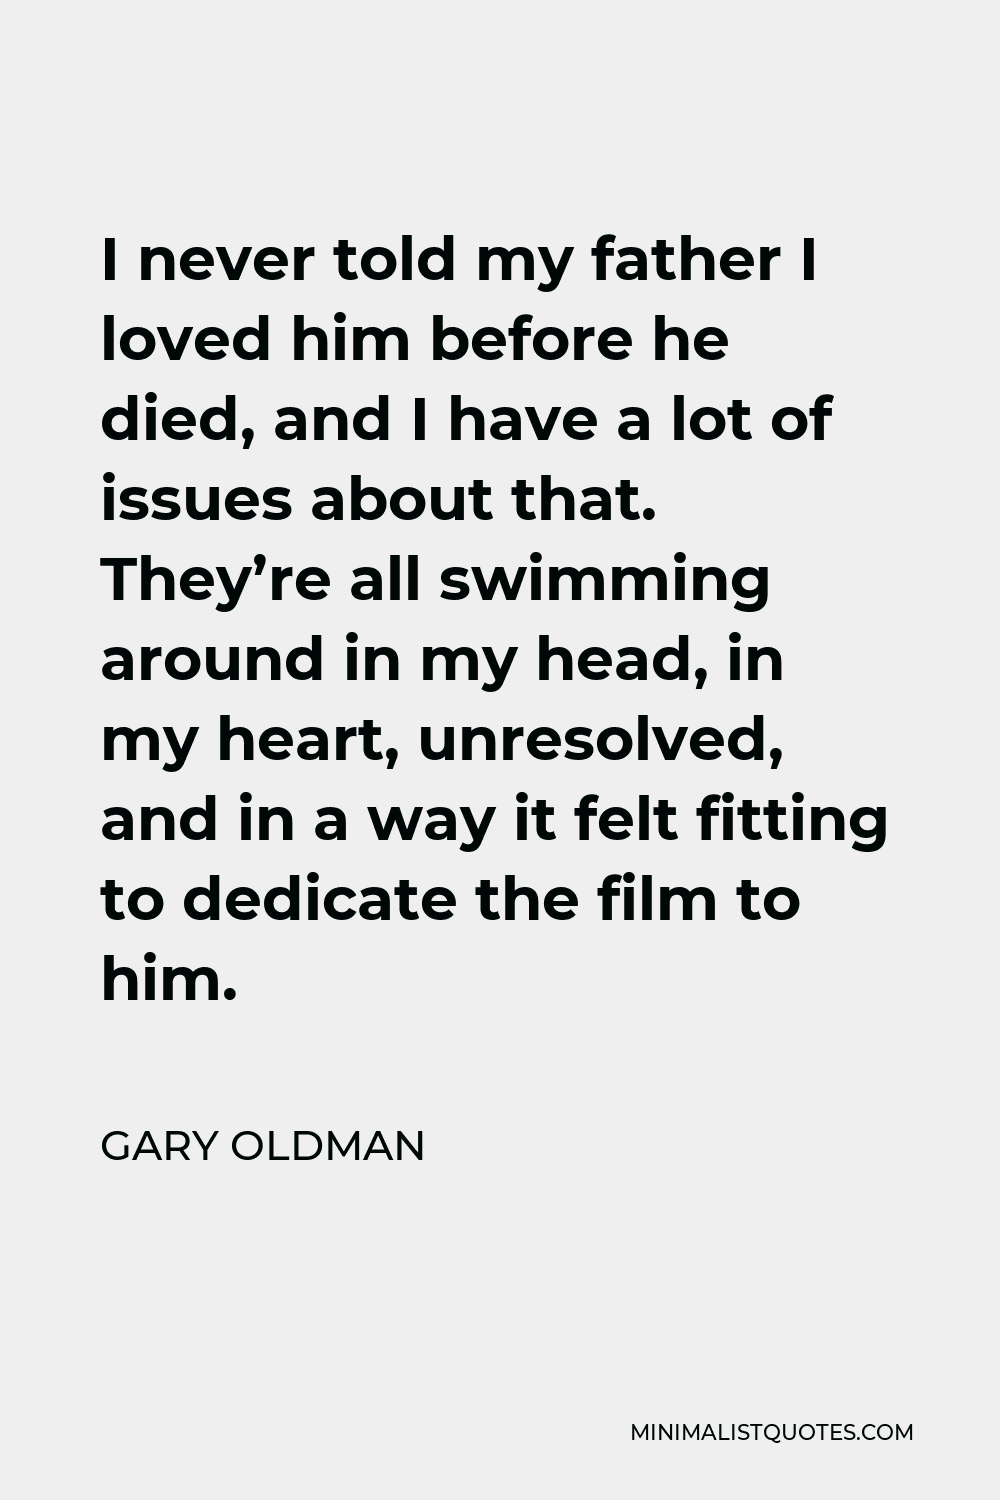 Gary Oldman Quote - I never told my father I loved him before he died, and I have a lot of issues about that. They’re all swimming around in my head, in my heart, unresolved, and in a way it felt fitting to dedicate the film to him.